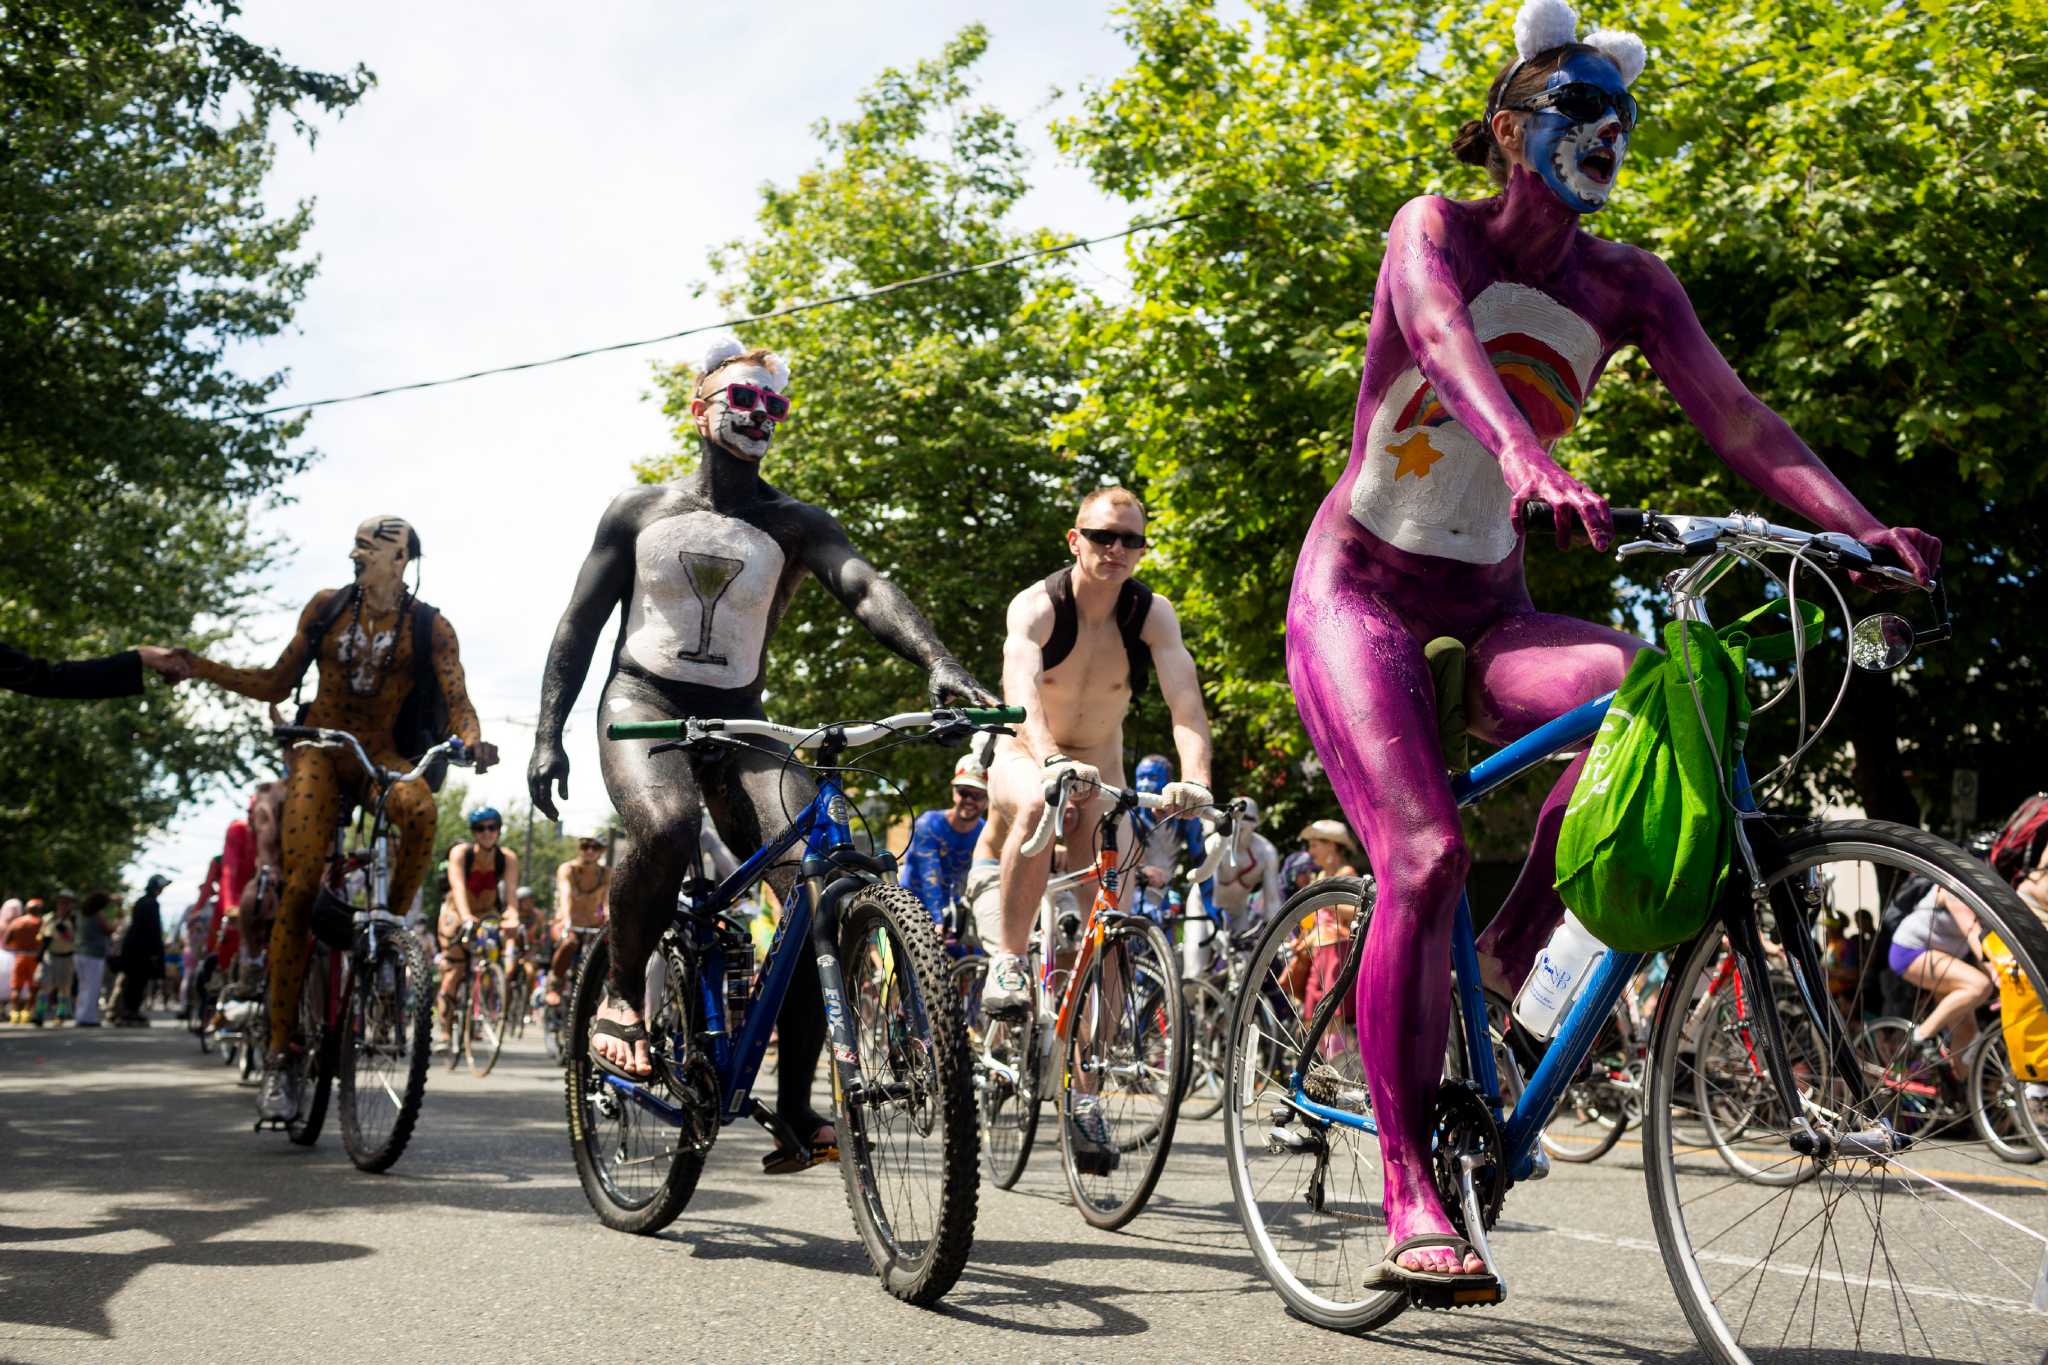 Fremont Solstice: Your guide to naked cycling, clothed partying and more.